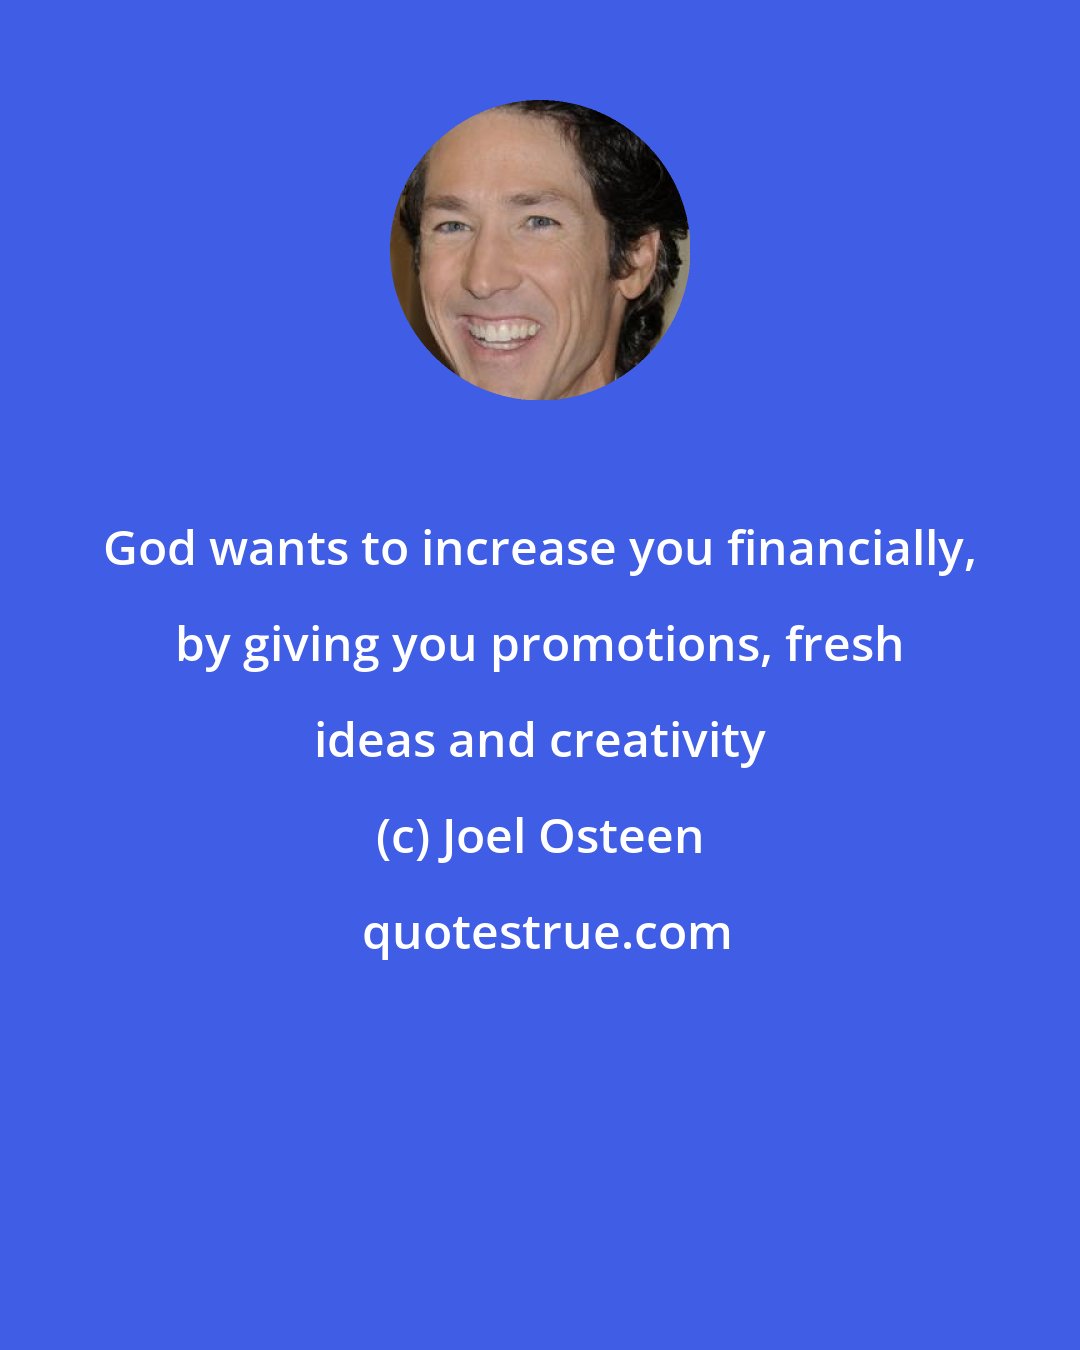 Joel Osteen: God wants to increase you financially, by giving you promotions, fresh ideas and creativity